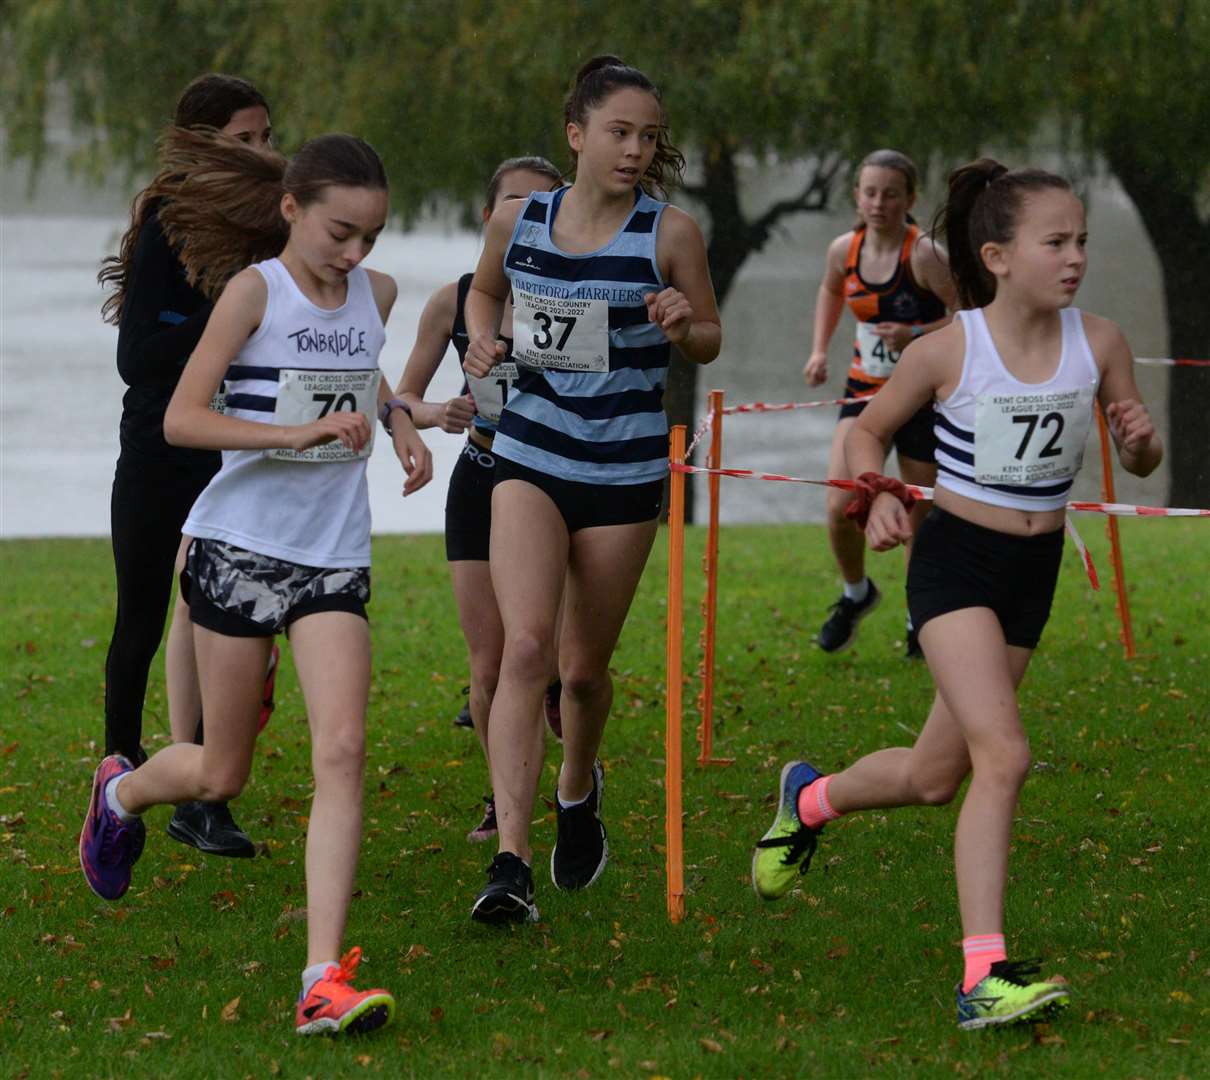 Hope Martin of Dartford Harriers (No.37) and Sena Wright of Tonbridge AC (No.72) race for under-13 glory. Picture: Chris Davey (52347953)